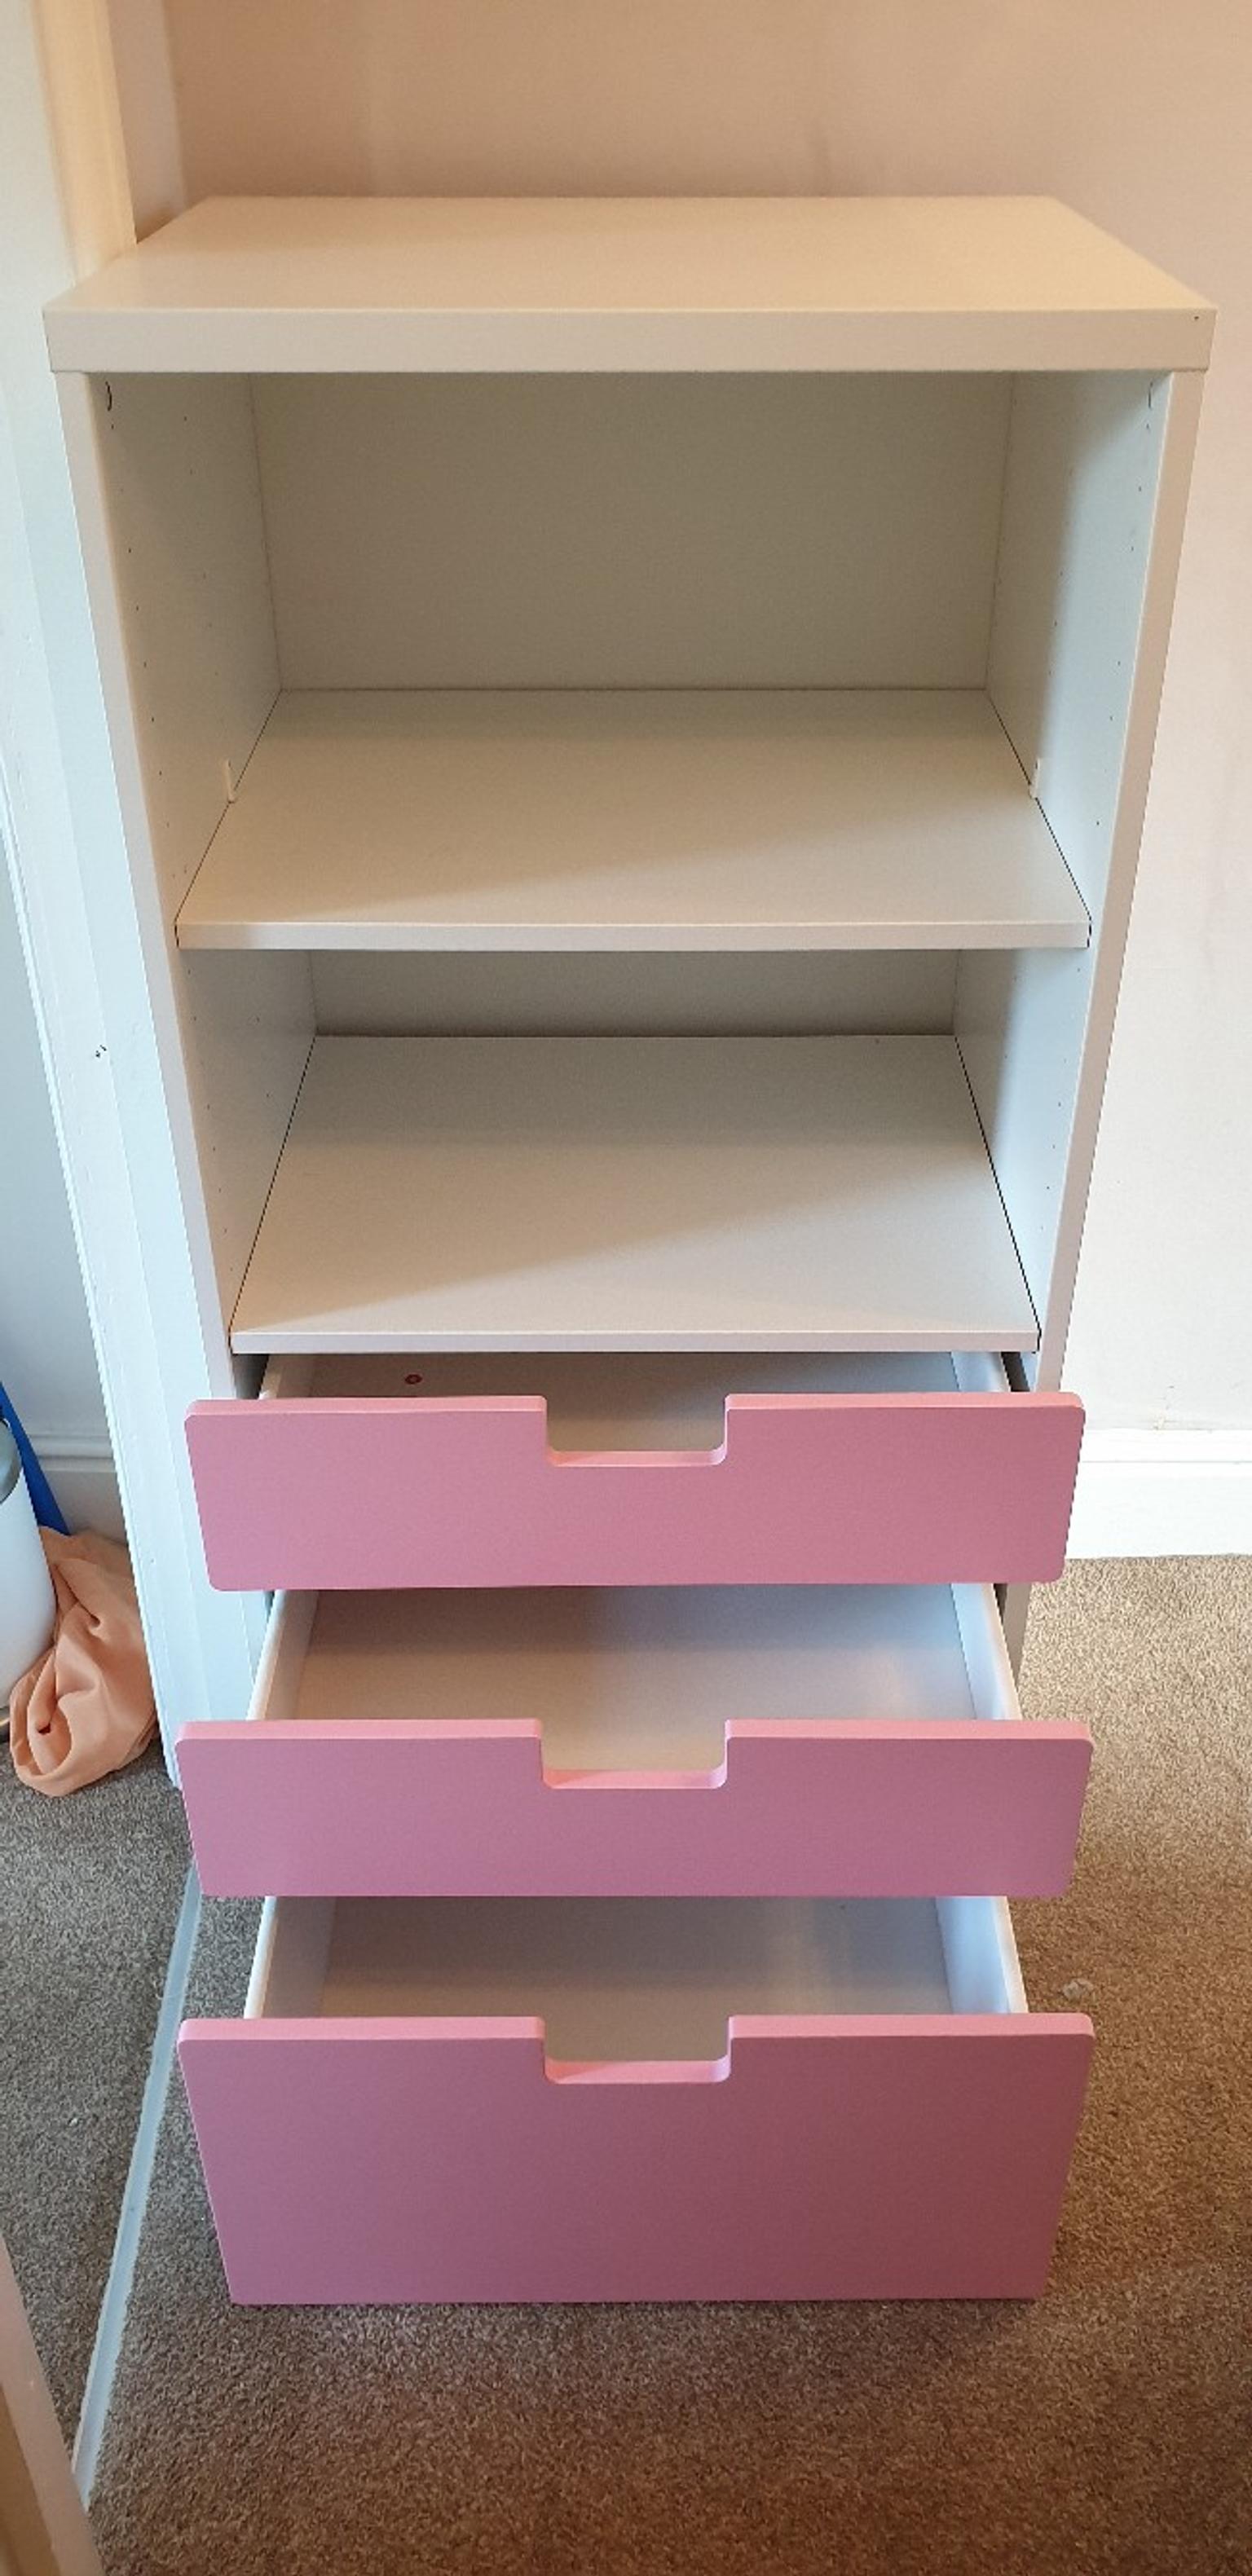 Ikea Childrens Bookcase And Drawer Unit In Sk13 Peak For 40 00